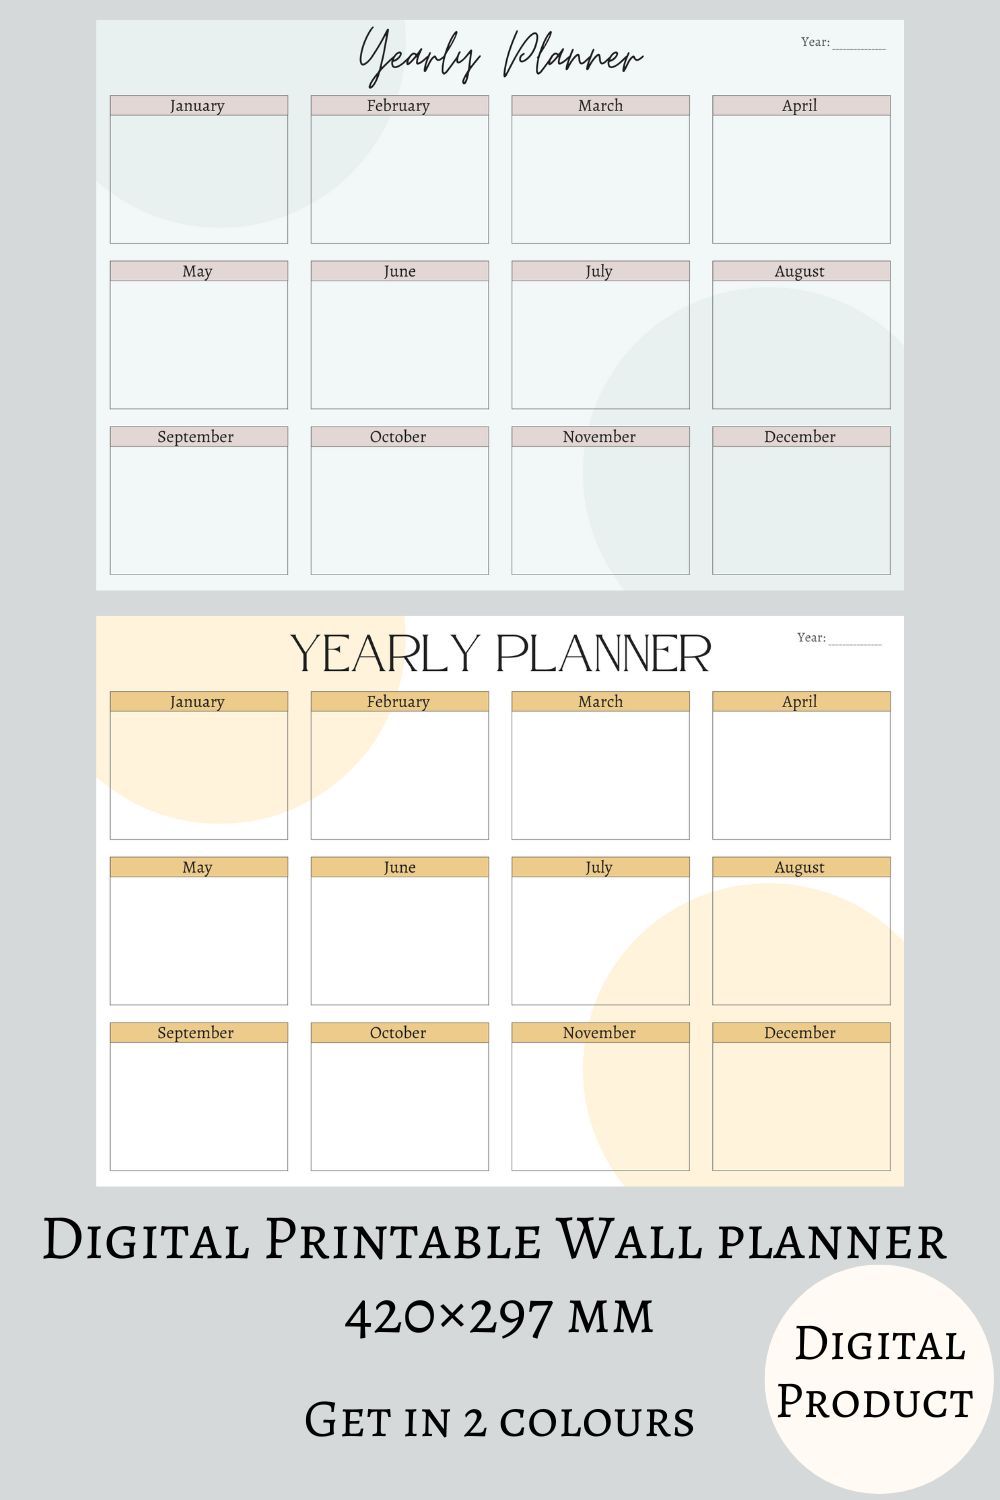 Digital Printable Wall Planner - pinterest image preview.